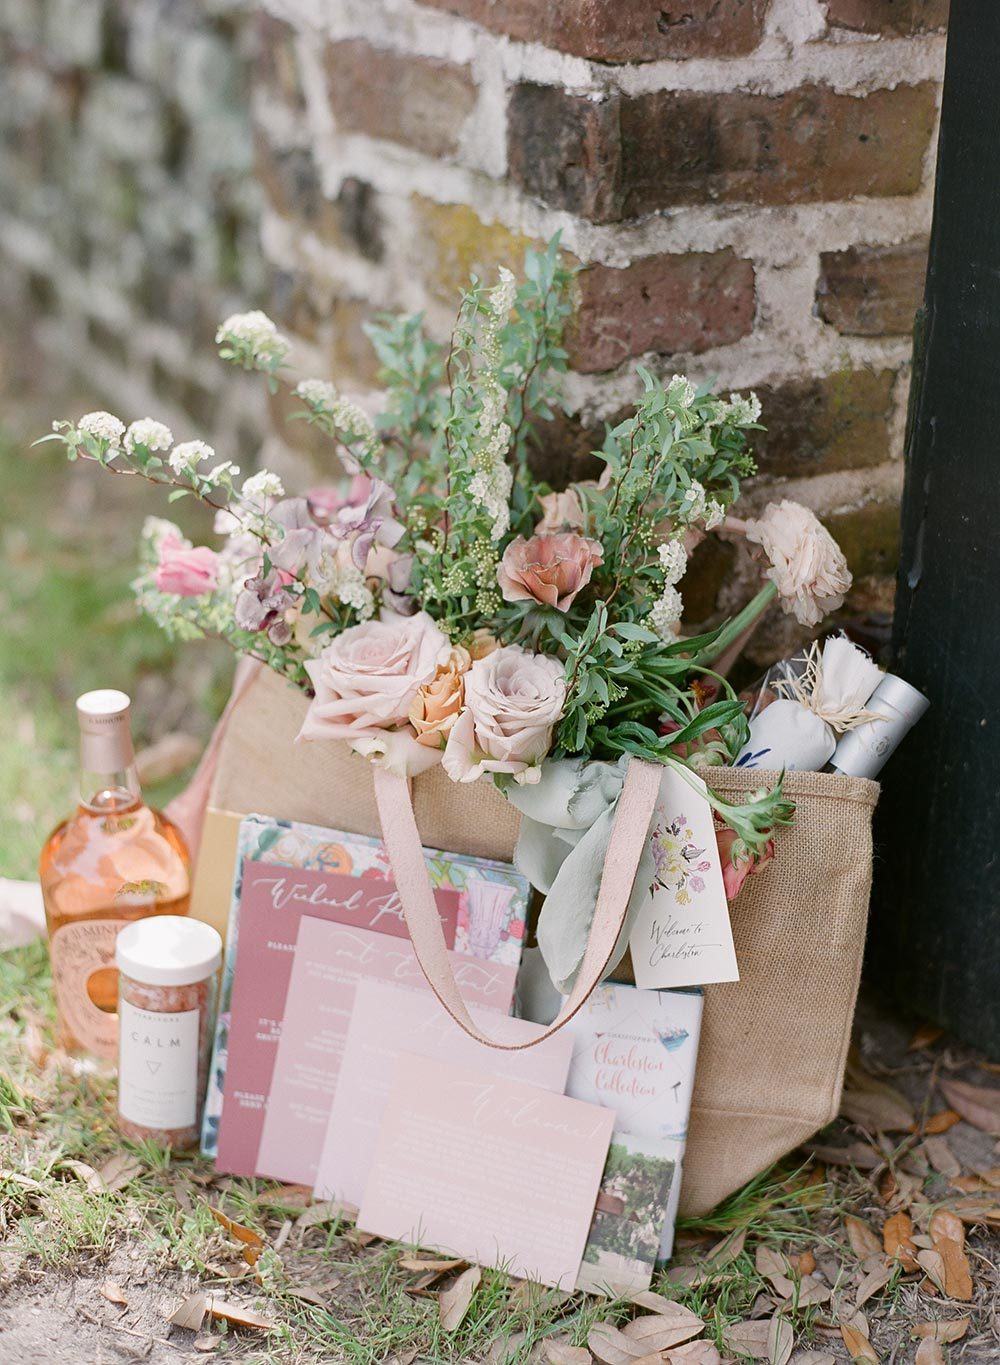 burlap tote with flowers, bath salts, champagne, chocolates and a modern weekend itinerary for a destination wedding welcome bag in Charleston, SC at Middleton Place; photography by The Happy Bloom and planning by Willow and Oak Events